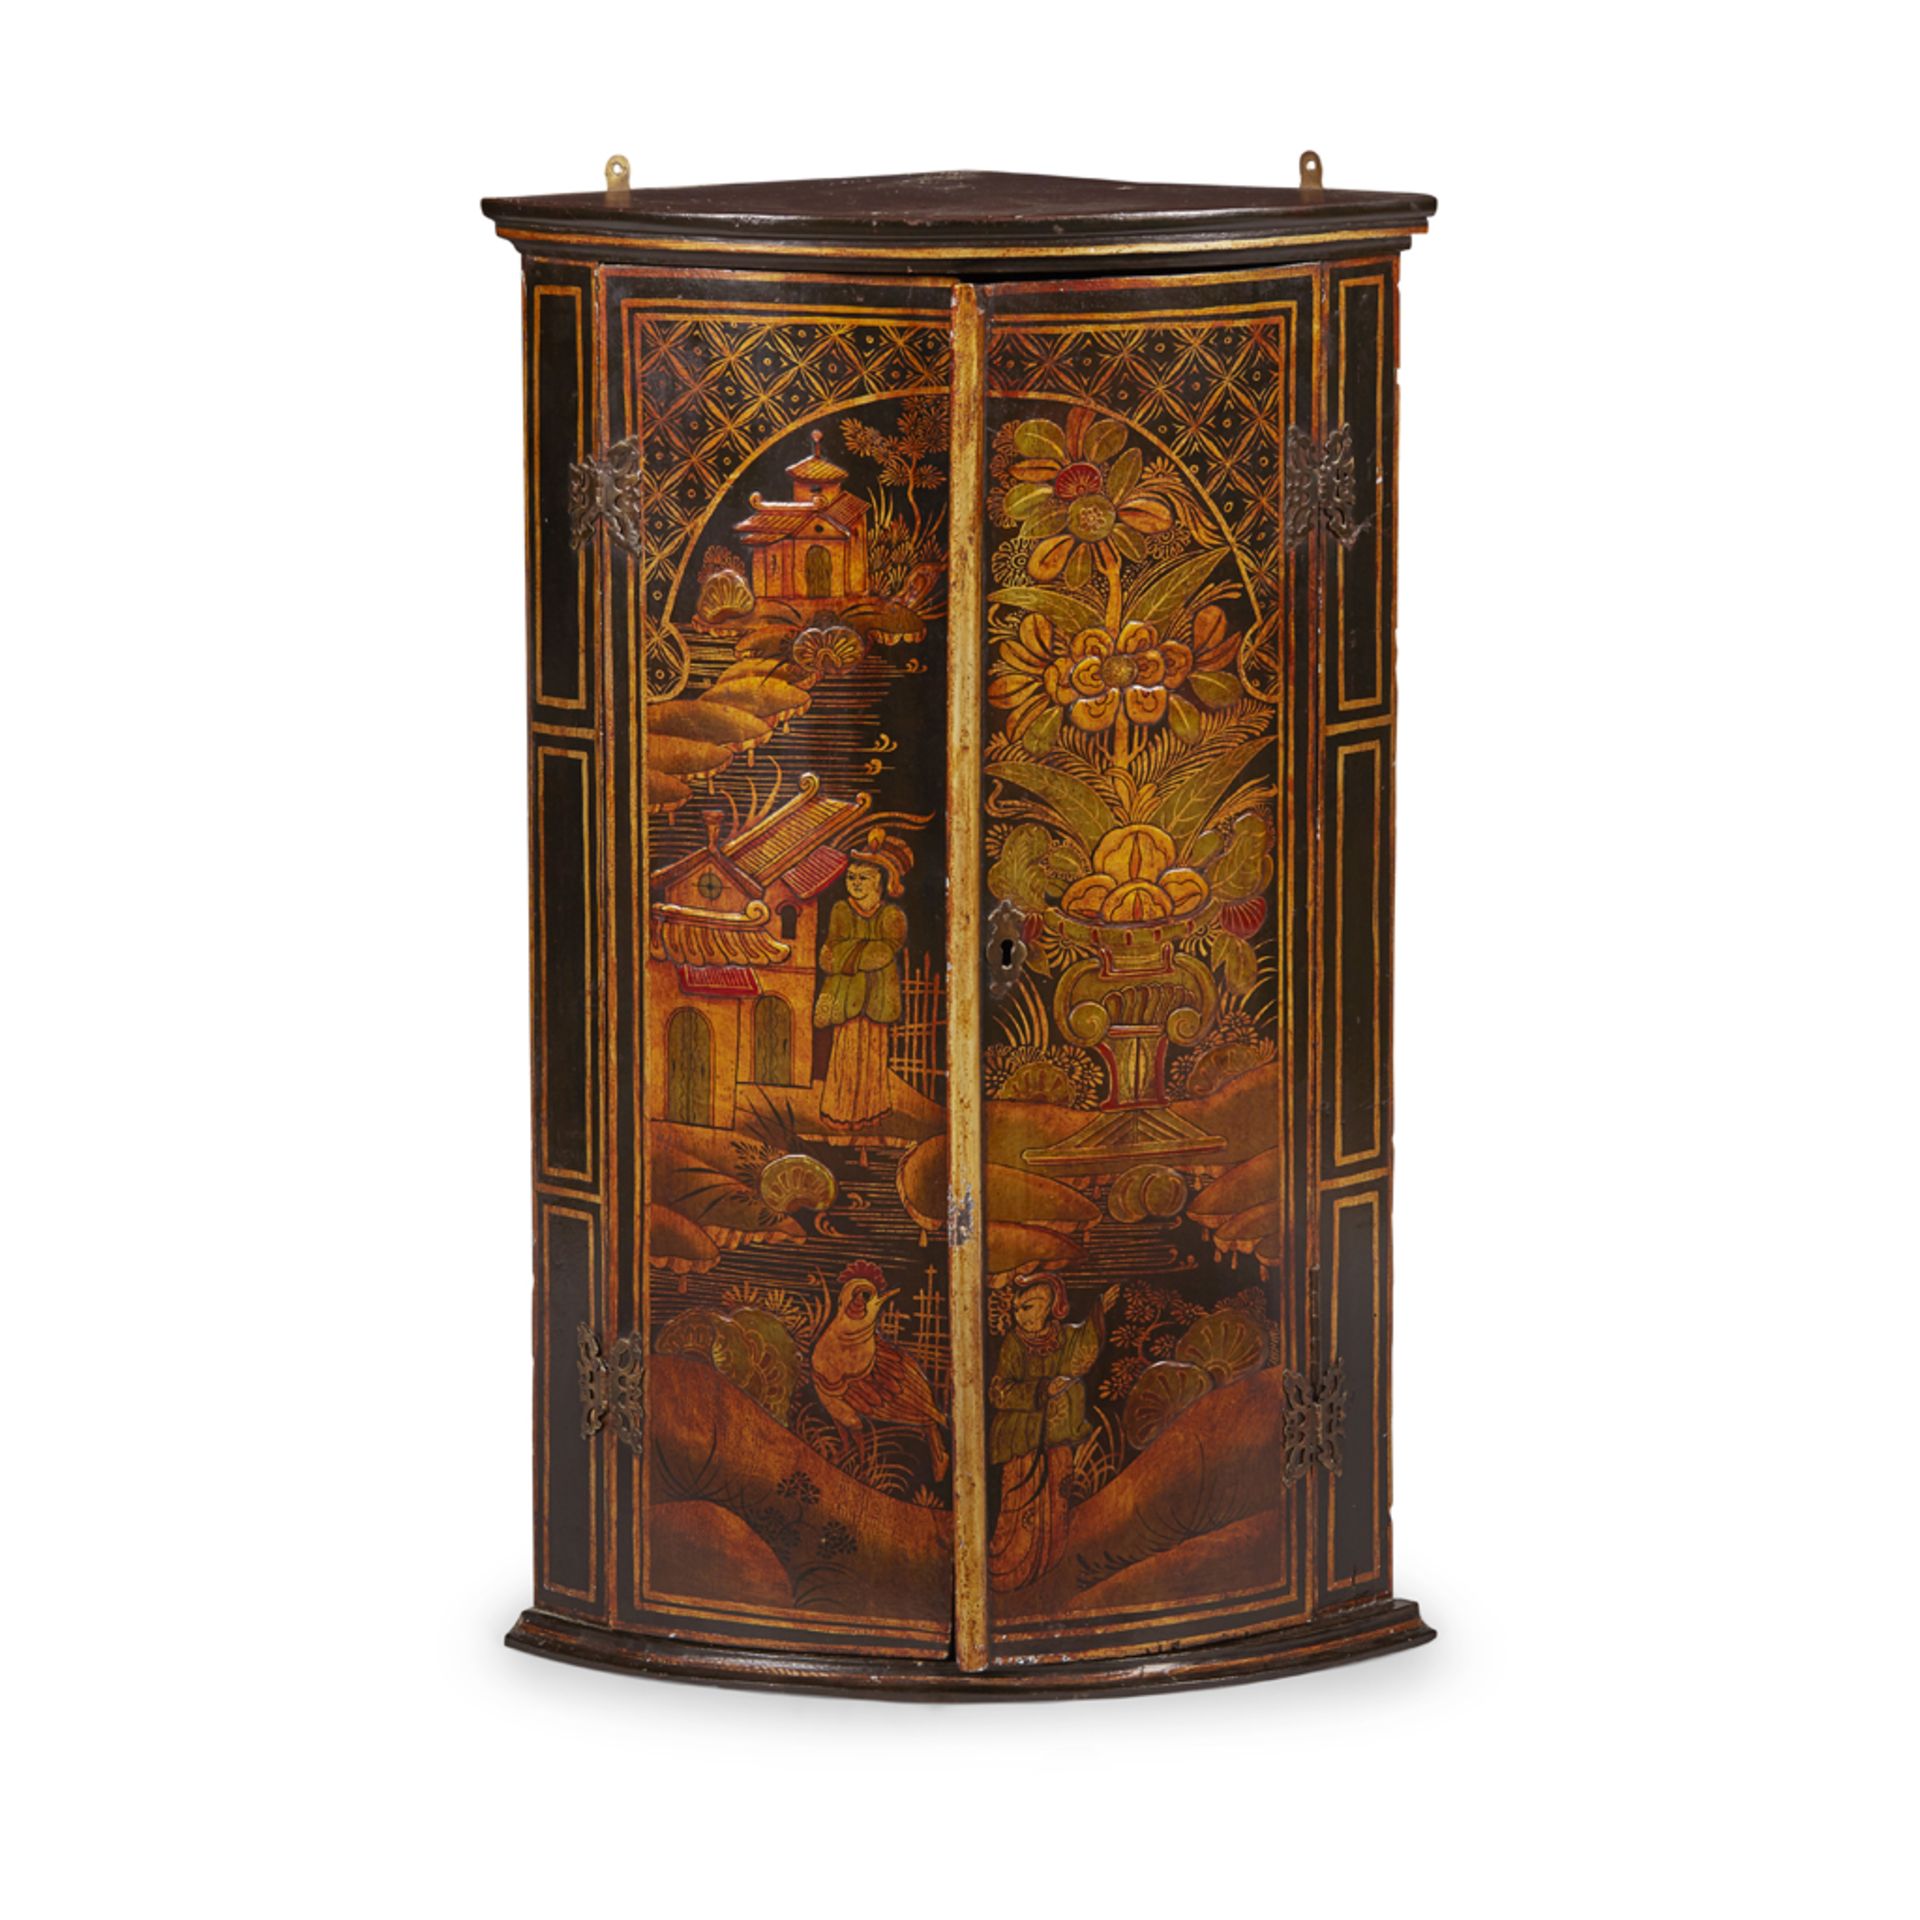 GEORGE III JAPANNED BOWFRONT CORNER CUPBOARD 18TH CENTURY decorated with Chinese figures, flower-